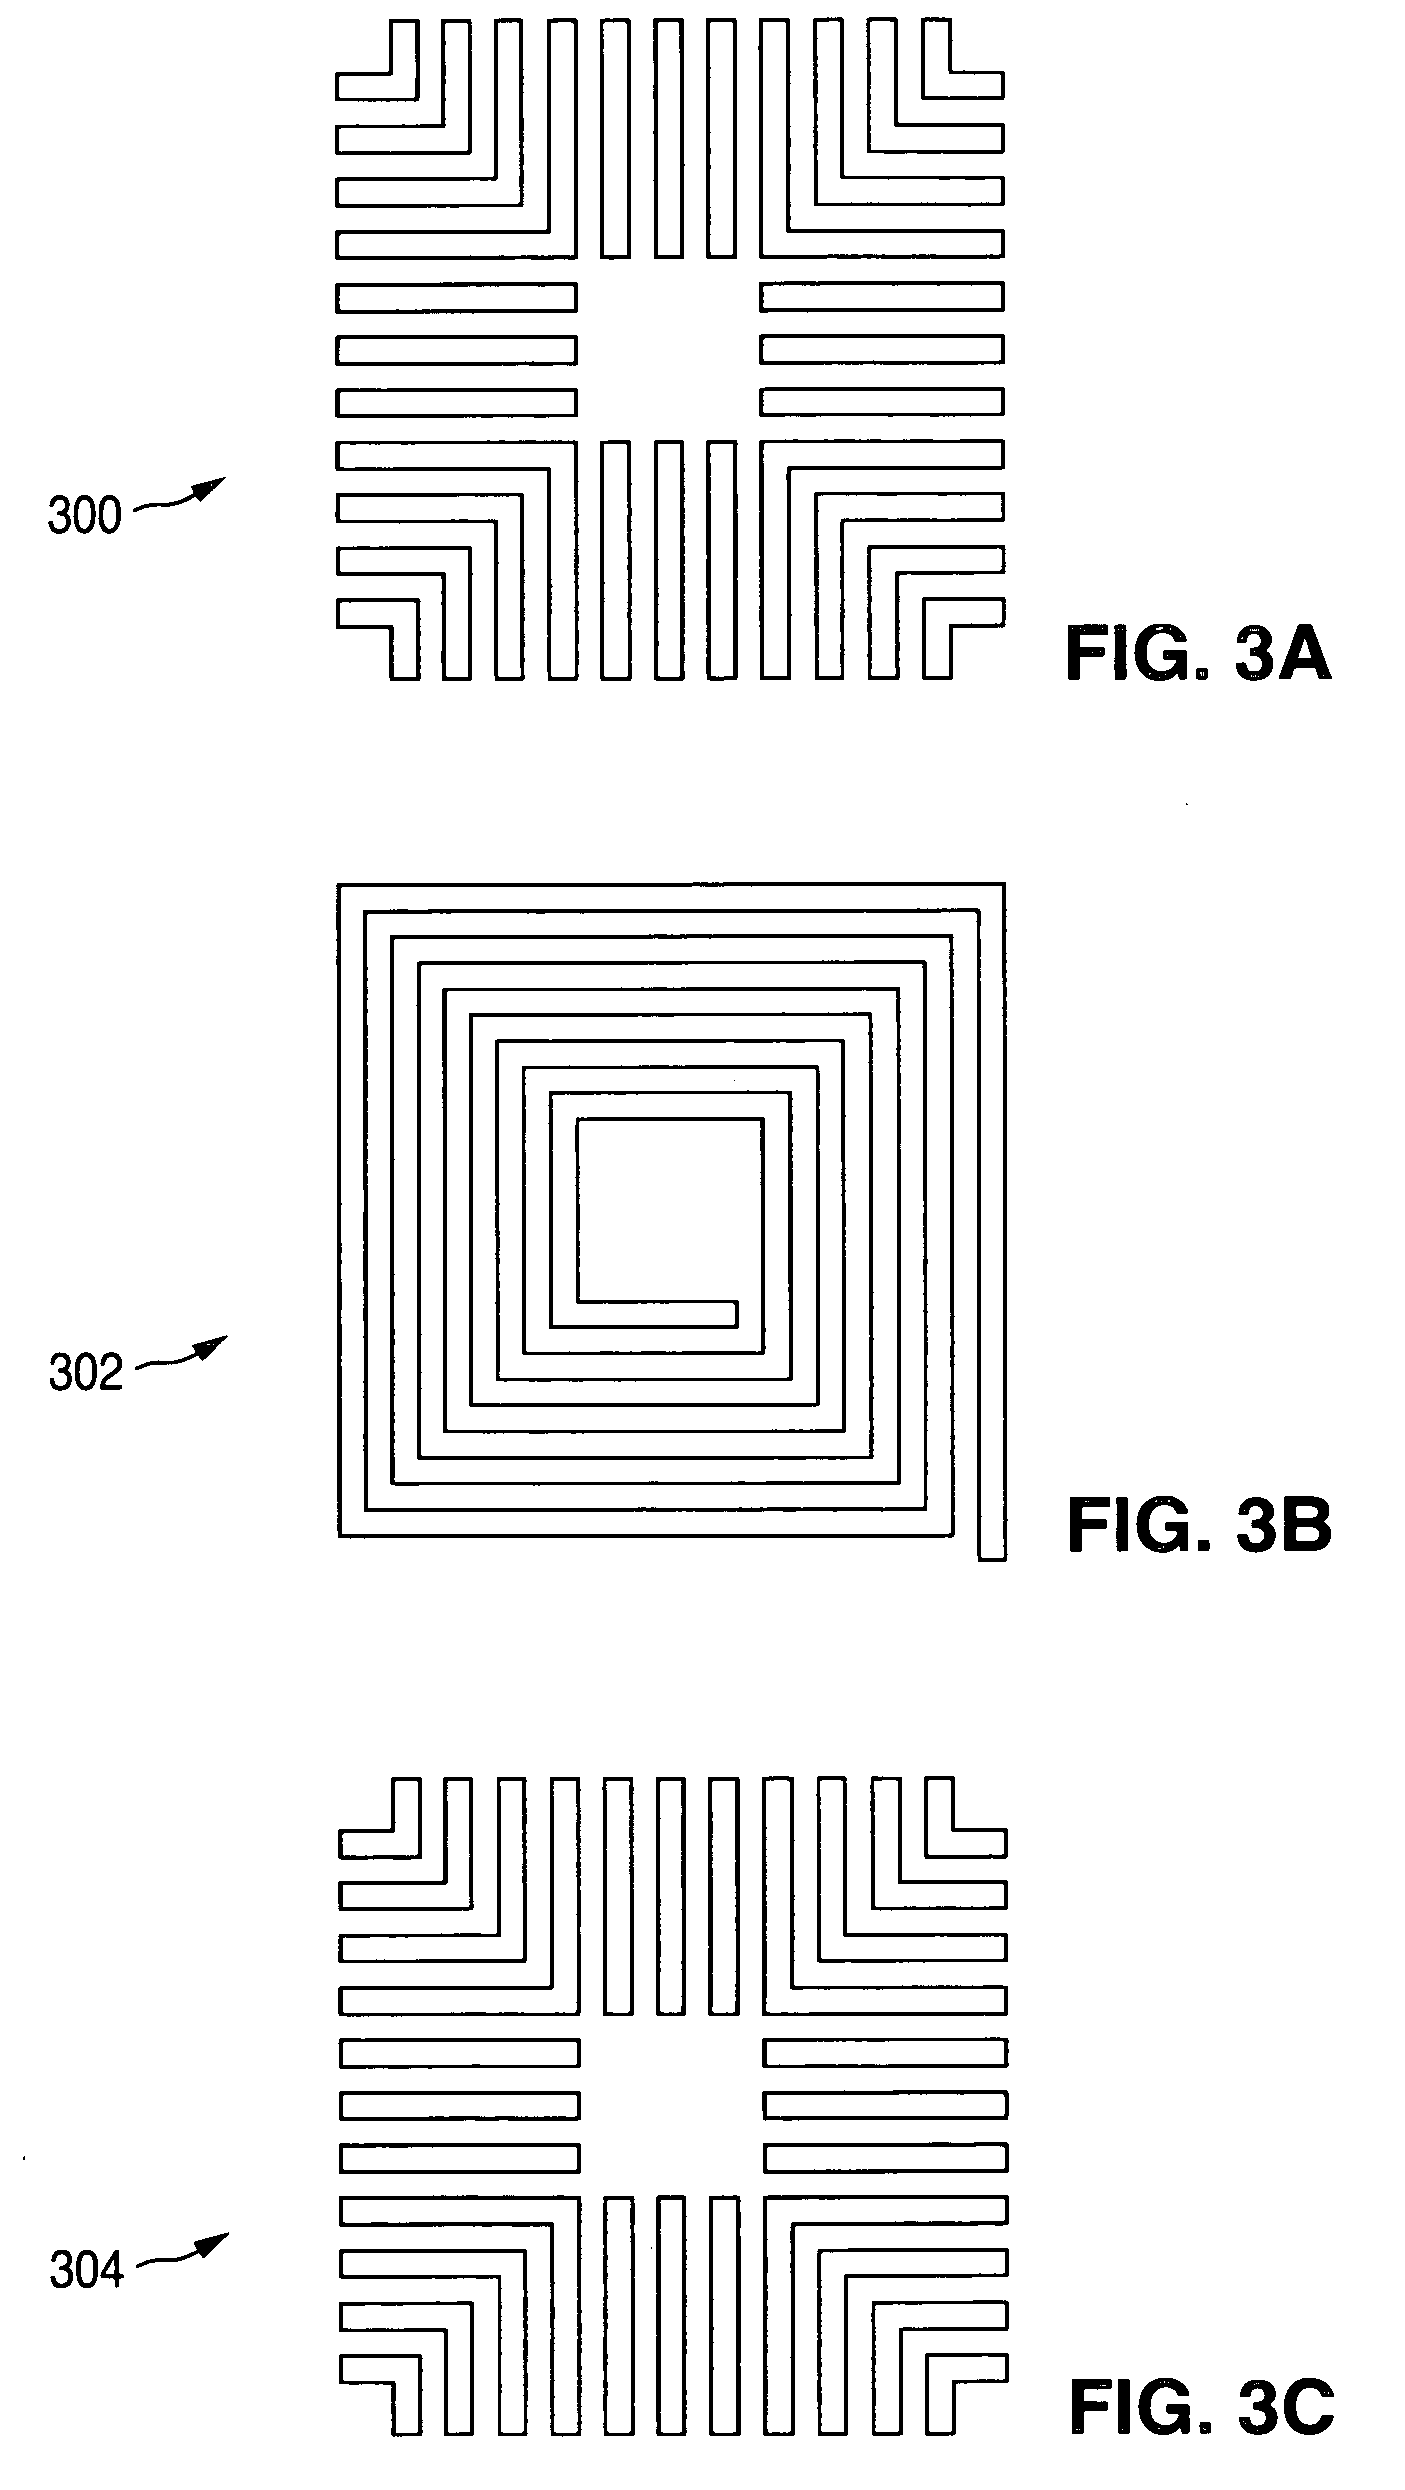 Magnetically enhanced power inductor with self-aligned hard axis magnetic core produced using a damascene process sequence